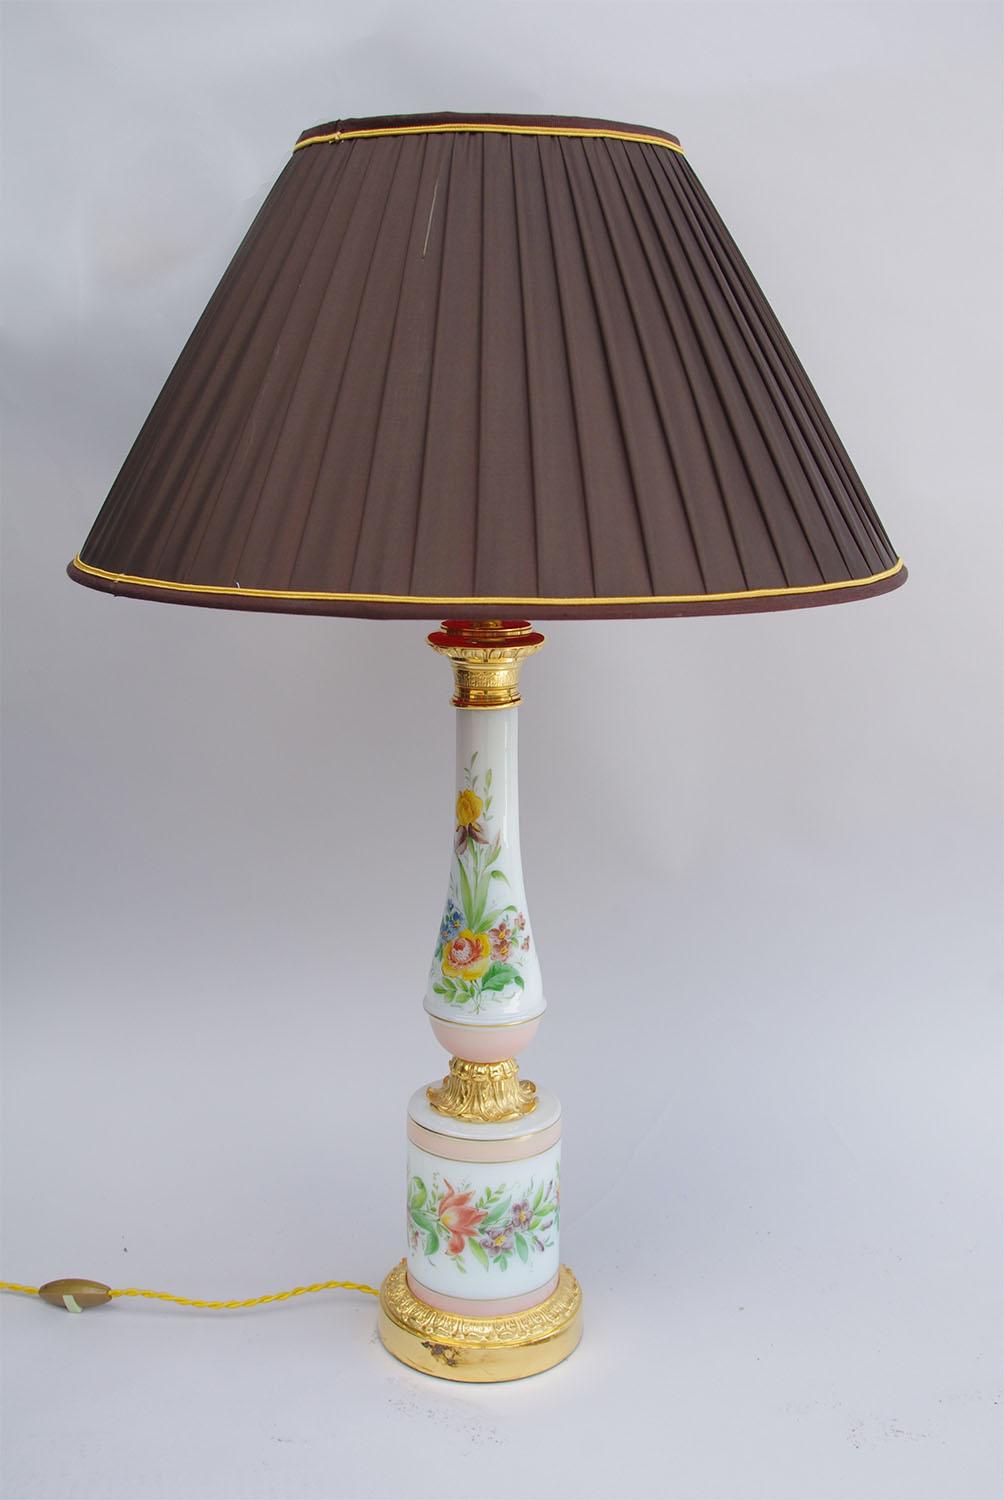 Bottle shaped on a cylindrical base white porcelain lamp in Paris Porcelain wares.
Decoration of pink banners framed with gilt highlights and different kinds of flowers such as roses, peonies, bellflowers etc.
Gilt bronze mount adorned with acanthus